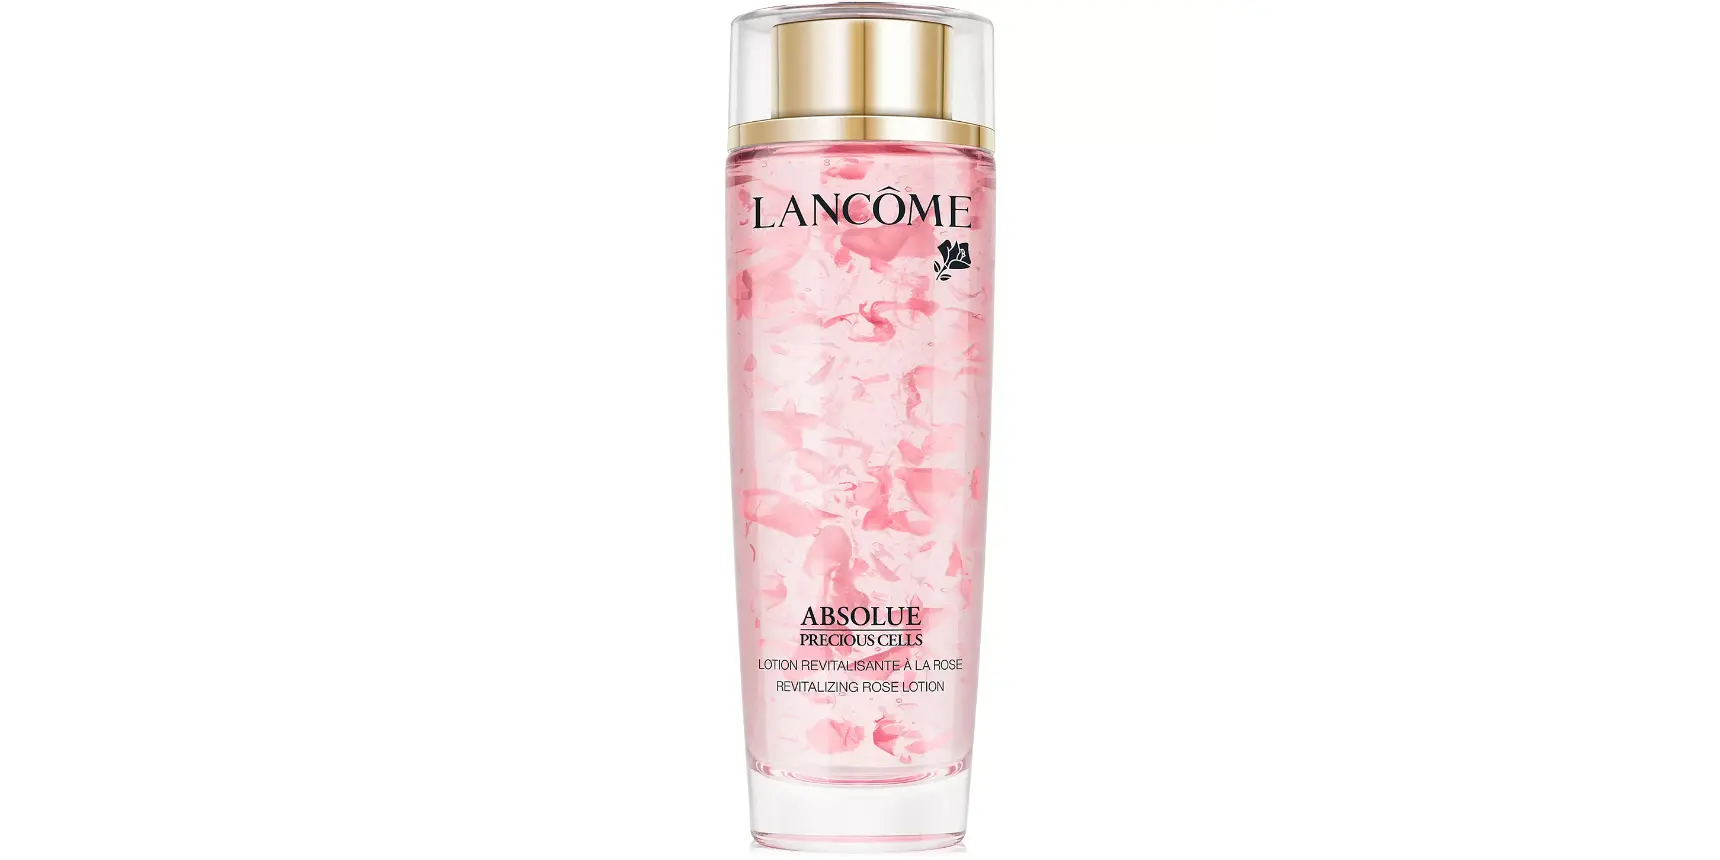 Macy - Lancome Absolue Precious Cells Revitalizing Rose Lotion 5oz.